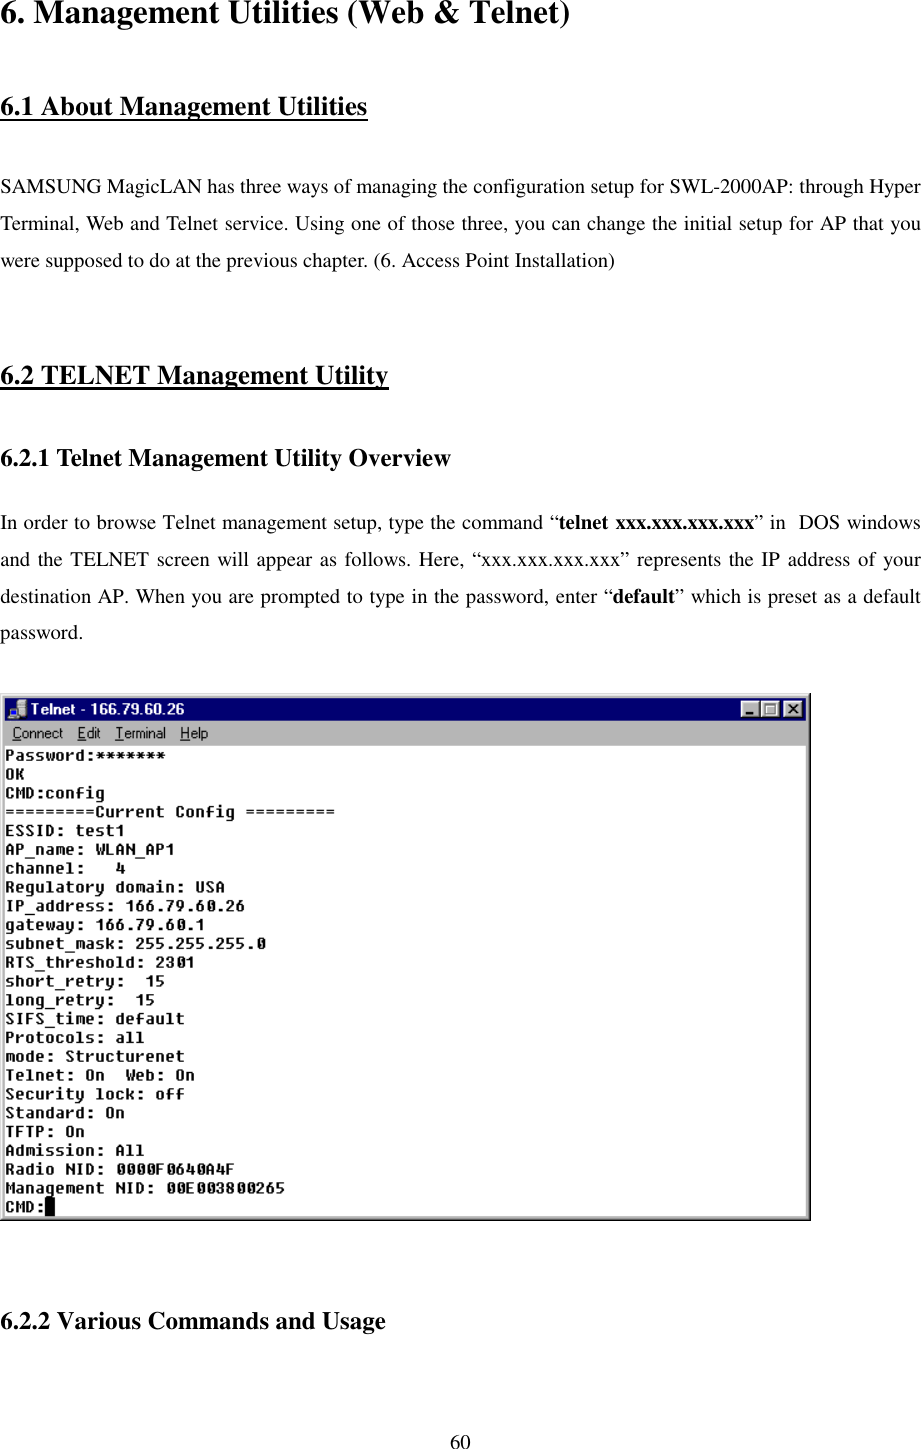   60 6. Management Utilities (Web &amp; Telnet)  6.1 About Management Utilities  SAMSUNG MagicLAN has three ways of managing the configuration setup for SWL-2000AP: through Hyper Terminal, Web and Telnet service. Using one of those three, you can change the initial setup for AP that you were supposed to do at the previous chapter. (6. Access Point Installation)   6.2 TELNET Management Utility  6.2.1 Telnet Management Utility Overview  In order to browse Telnet management setup, type the command “telnet xxx.xxx.xxx.xxx” in  DOS windows and the TELNET screen will appear as follows. Here, “xxx.xxx.xxx.xxx” represents the IP address of your destination AP. When you are prompted to type in the password, enter “default” which is preset as a default password.     6.2.2 Various Commands and Usage  